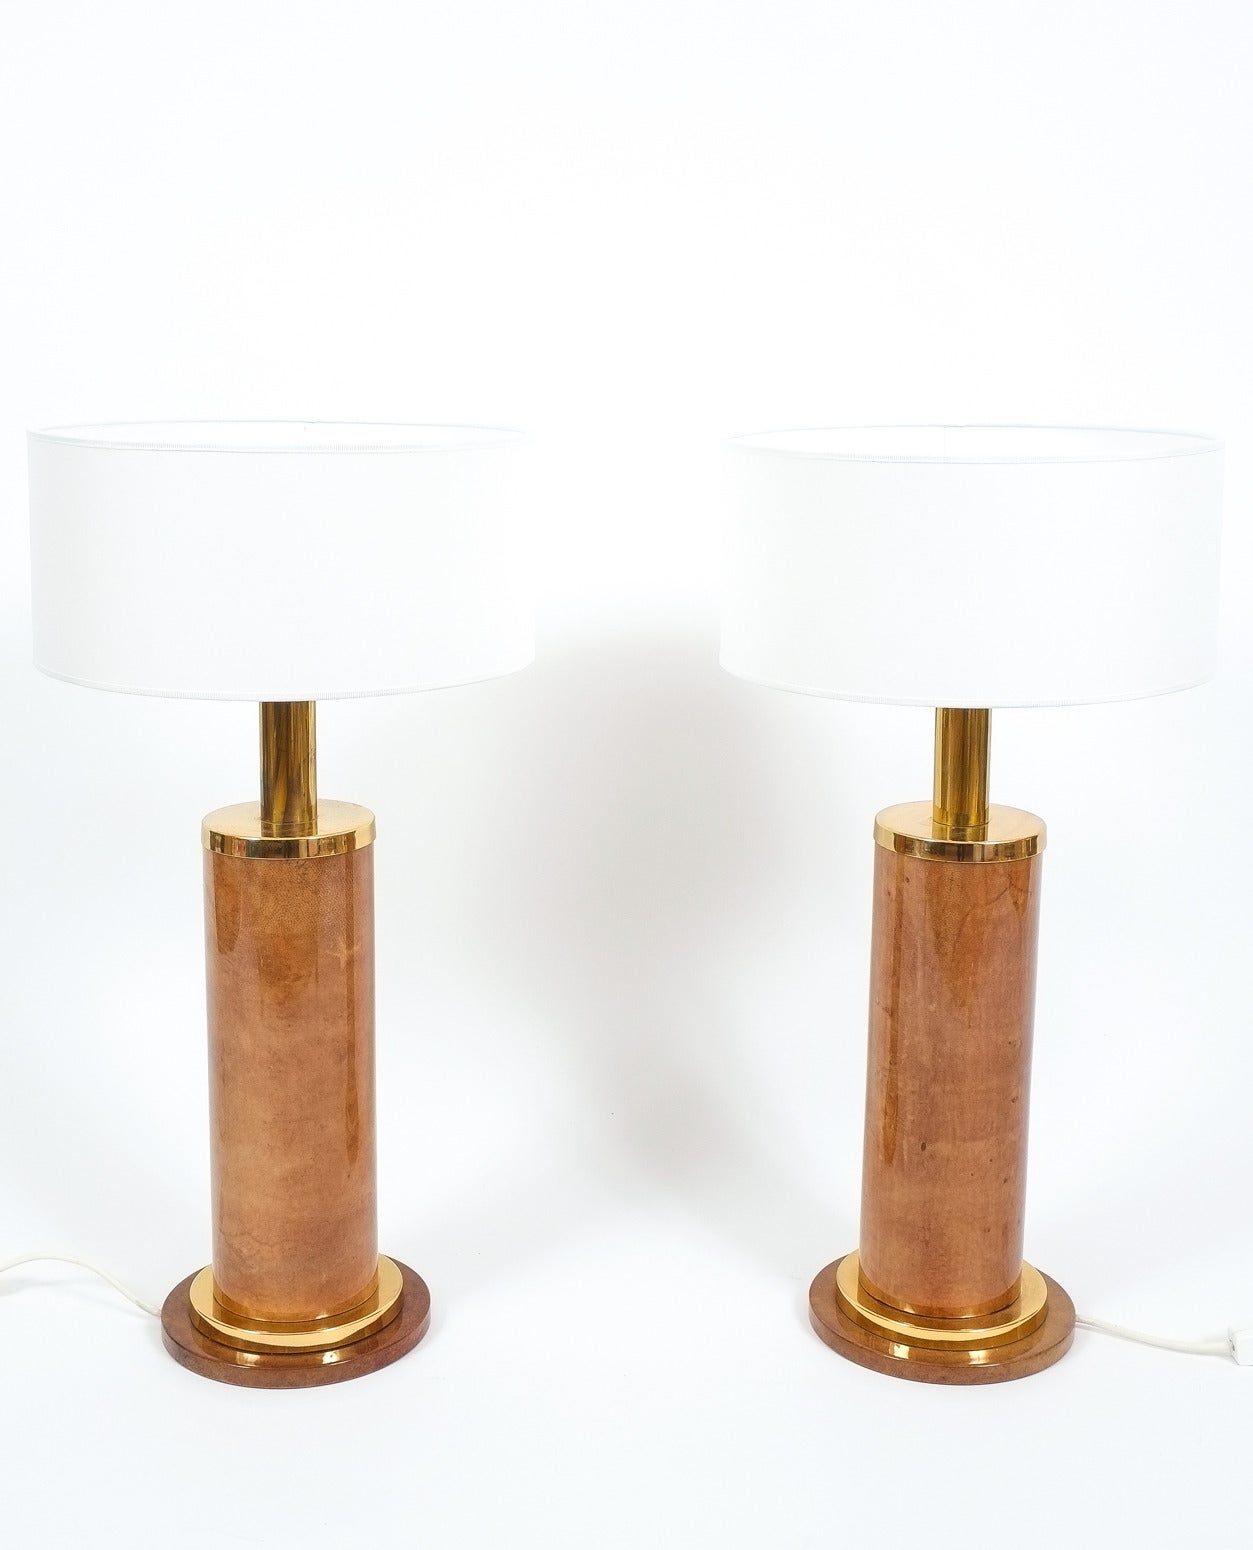 Aldo Tura pair of large table lamps parchment, Italy, circa 1960. Rare pair of rare Aldo Tura table lamps in excellent condition. Composed of dyed parchment each light holds a single large bulb with 75W max. The parchment and brass are in excellent